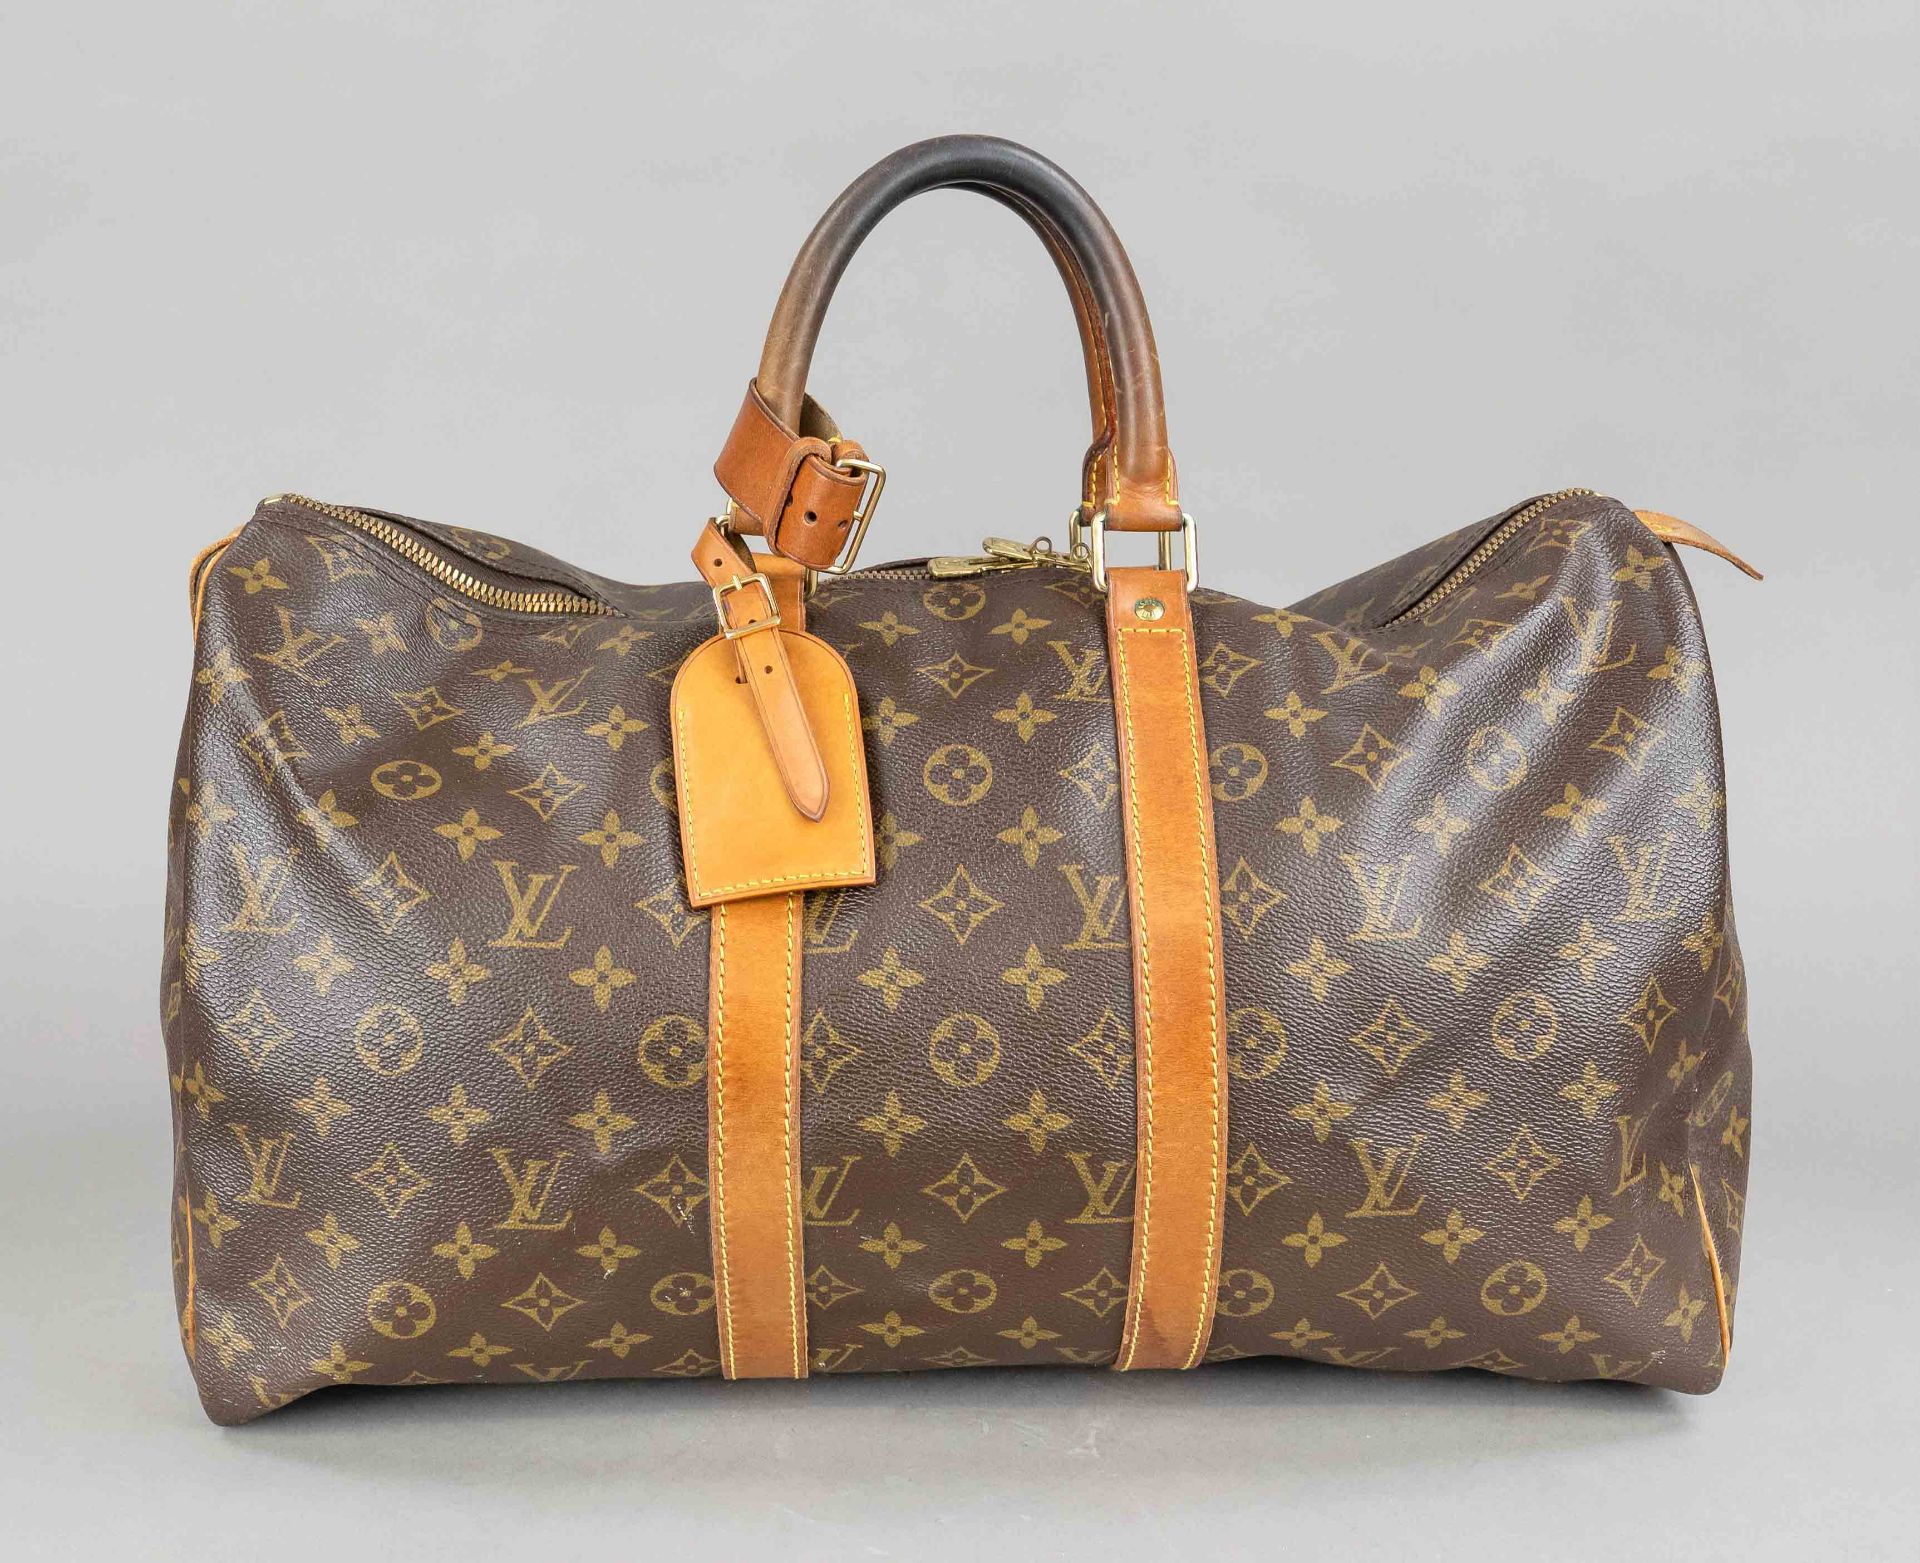 Louis Vuitton, Monogram Canvas Keepall Bandouliere 45 Bag, rubberized cotton fabric in classic